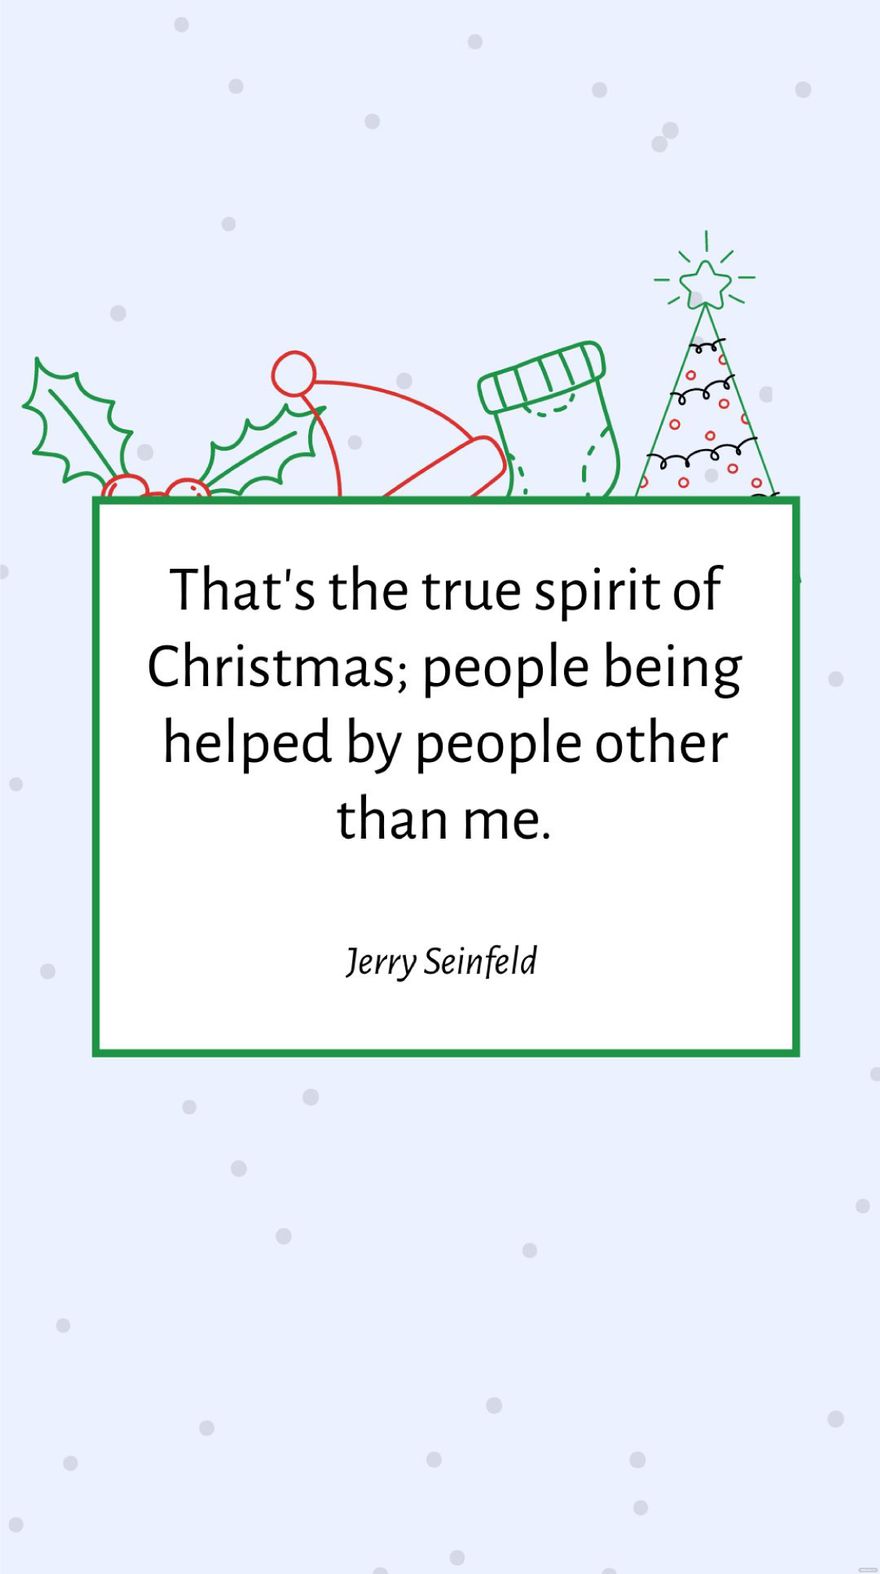 Free Jerry Seinfeld - That's the true spirit of Christmas; people being helped by people other than me. in JPG